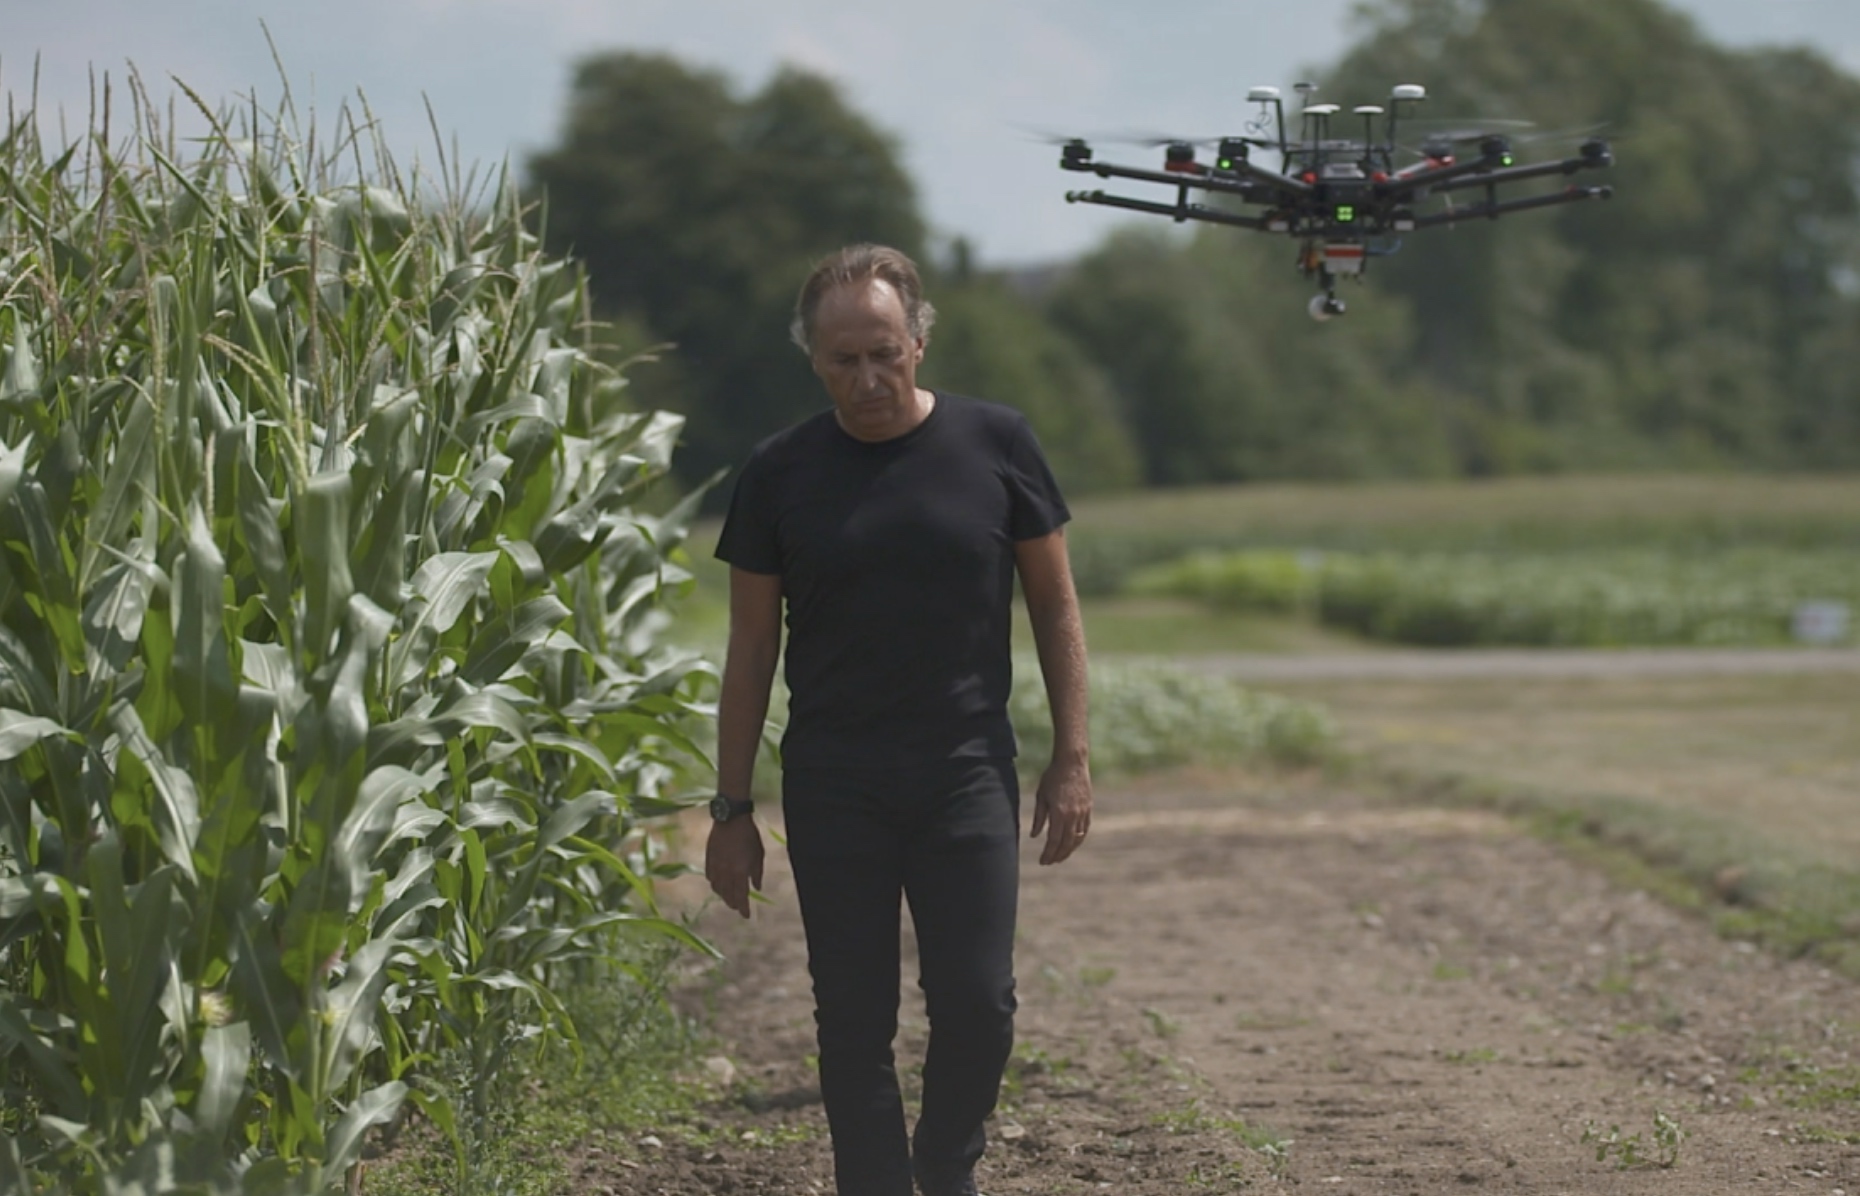 Bruno Basso, John A. Hannah Distinguished Professor at Michigan State University, walks in front a drone in a field, which he uses to map Michigan farmers' fields and design a prescription for what their crops need. 